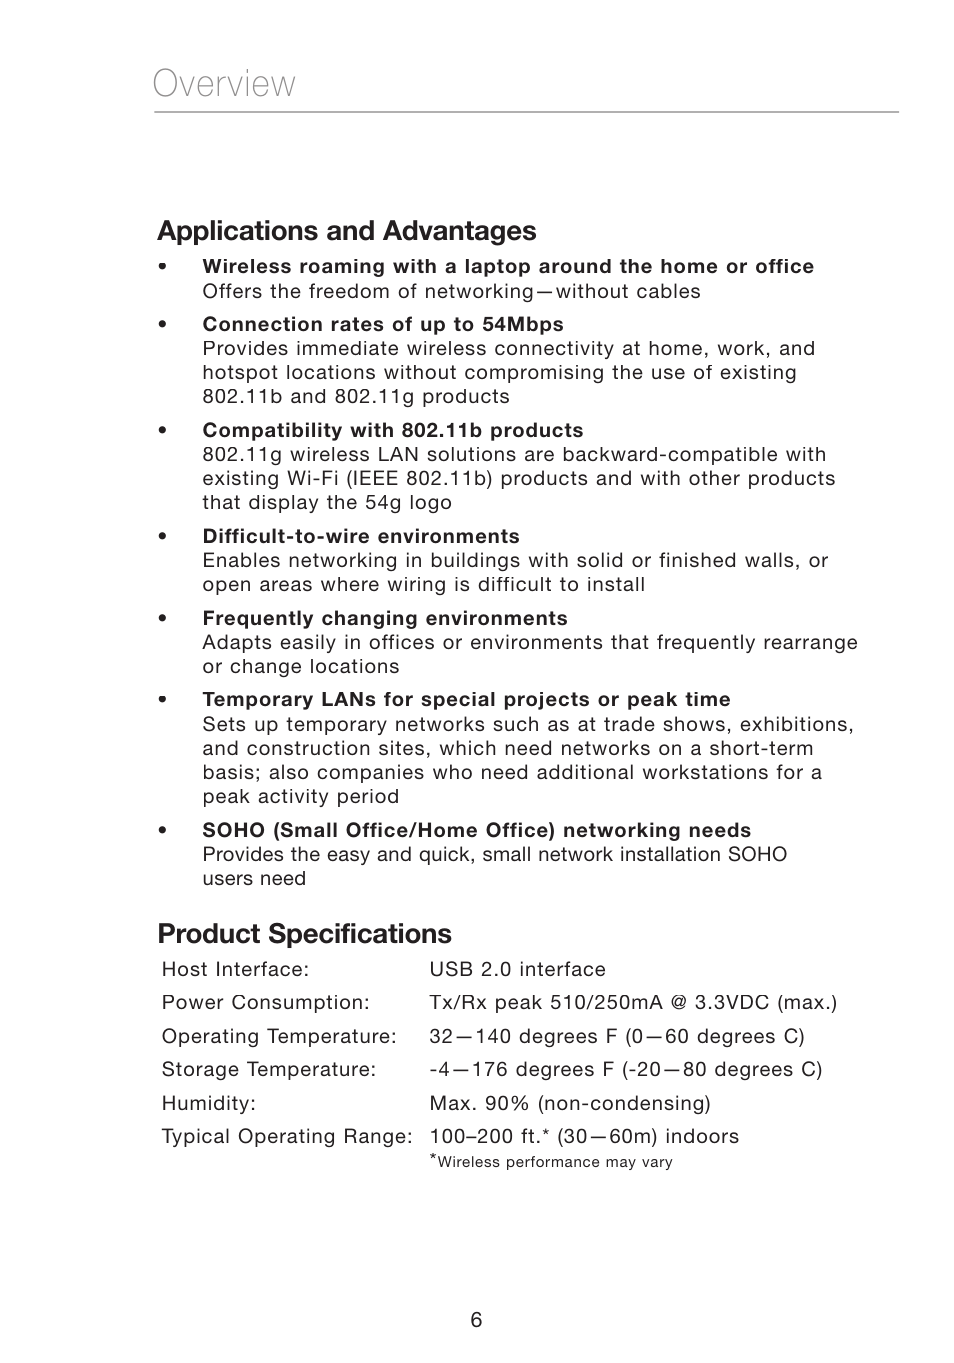 Overview, Applications and advantages, Product specifications | Verizon VZ4050 User Manual | Page 8 / 40